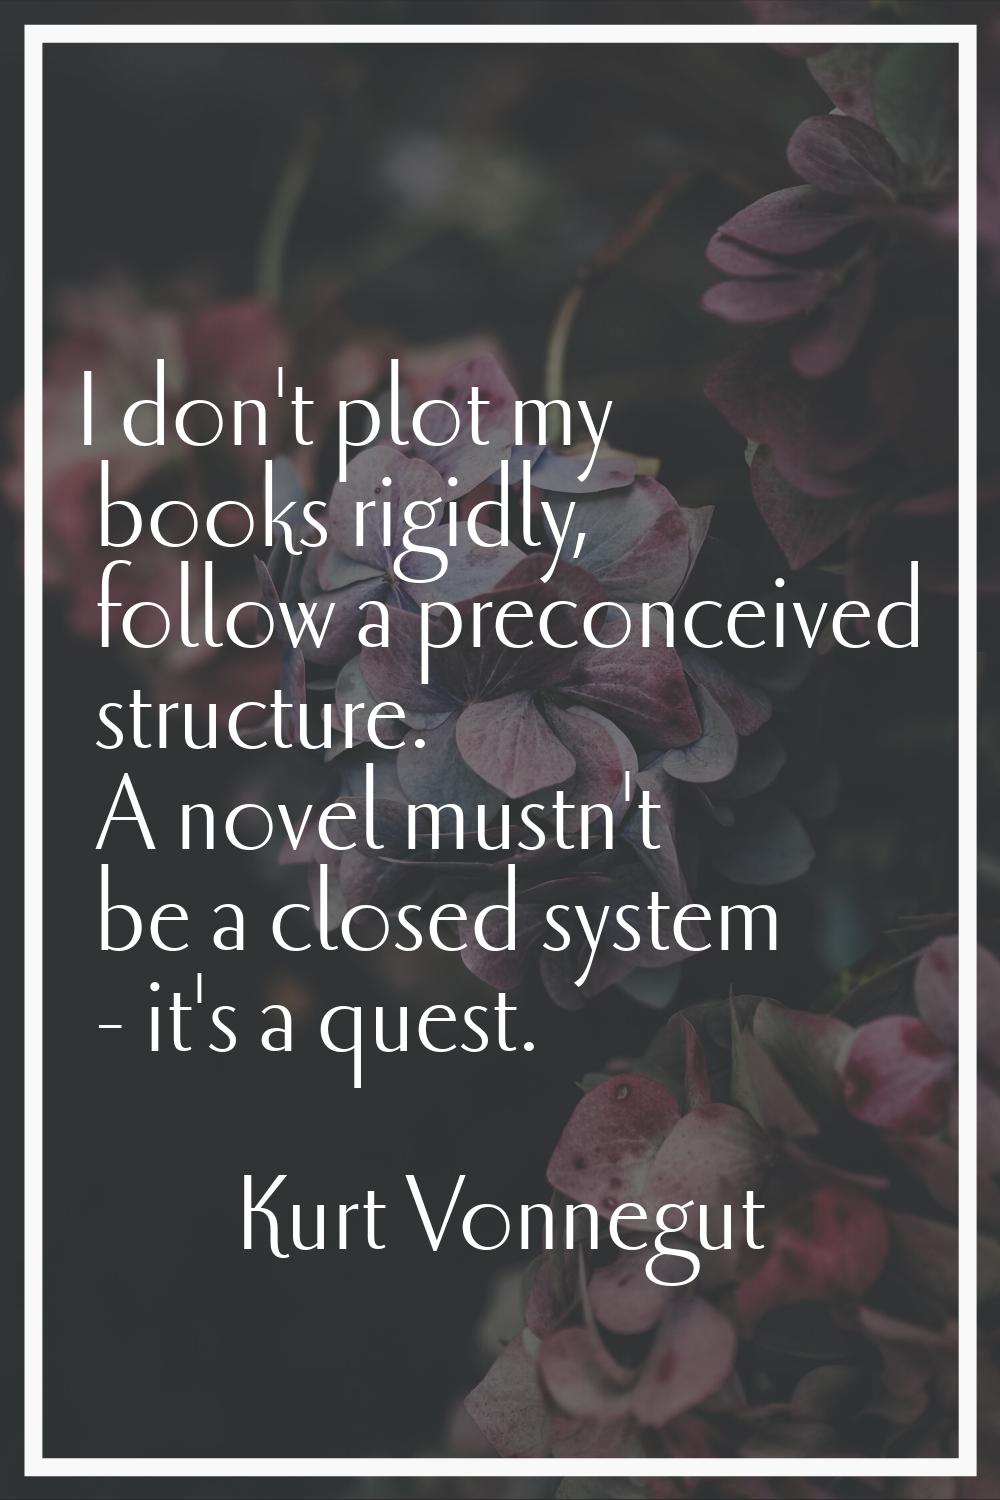 I don't plot my books rigidly, follow a preconceived structure. A novel mustn't be a closed system 